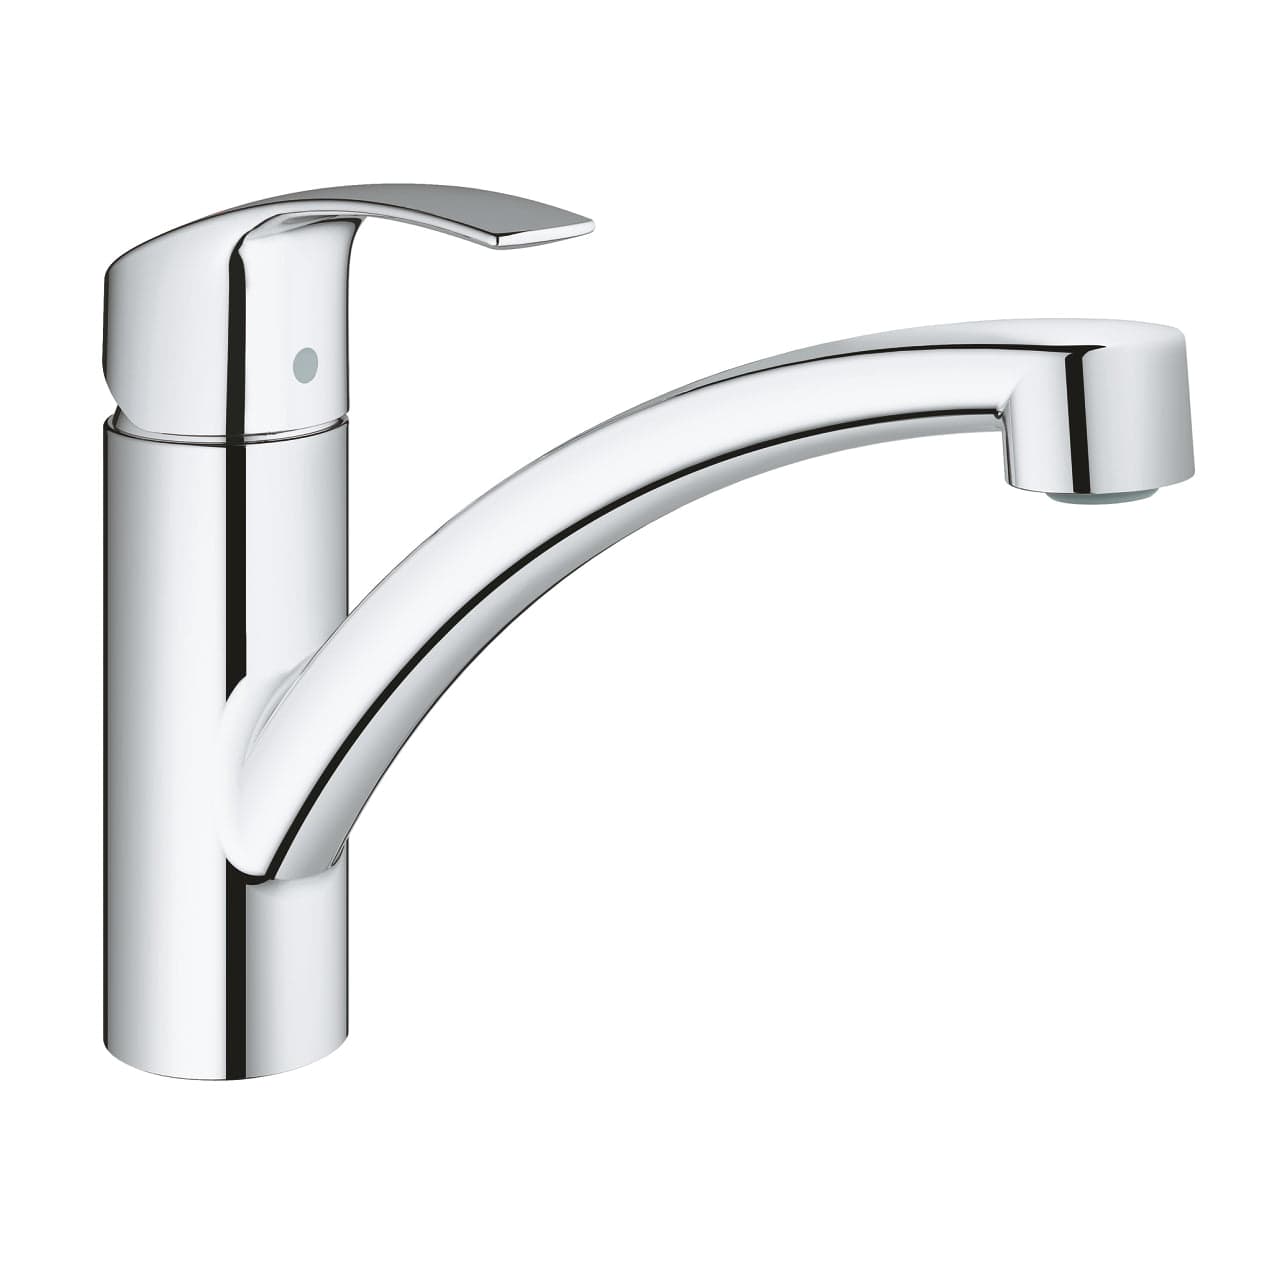 Grohe Eurodisc Cosmopolitan Single-Lever Sink Mixer | Supply Master | Accra, Ghana Kitchen Tap Buy Tools hardware Building materials